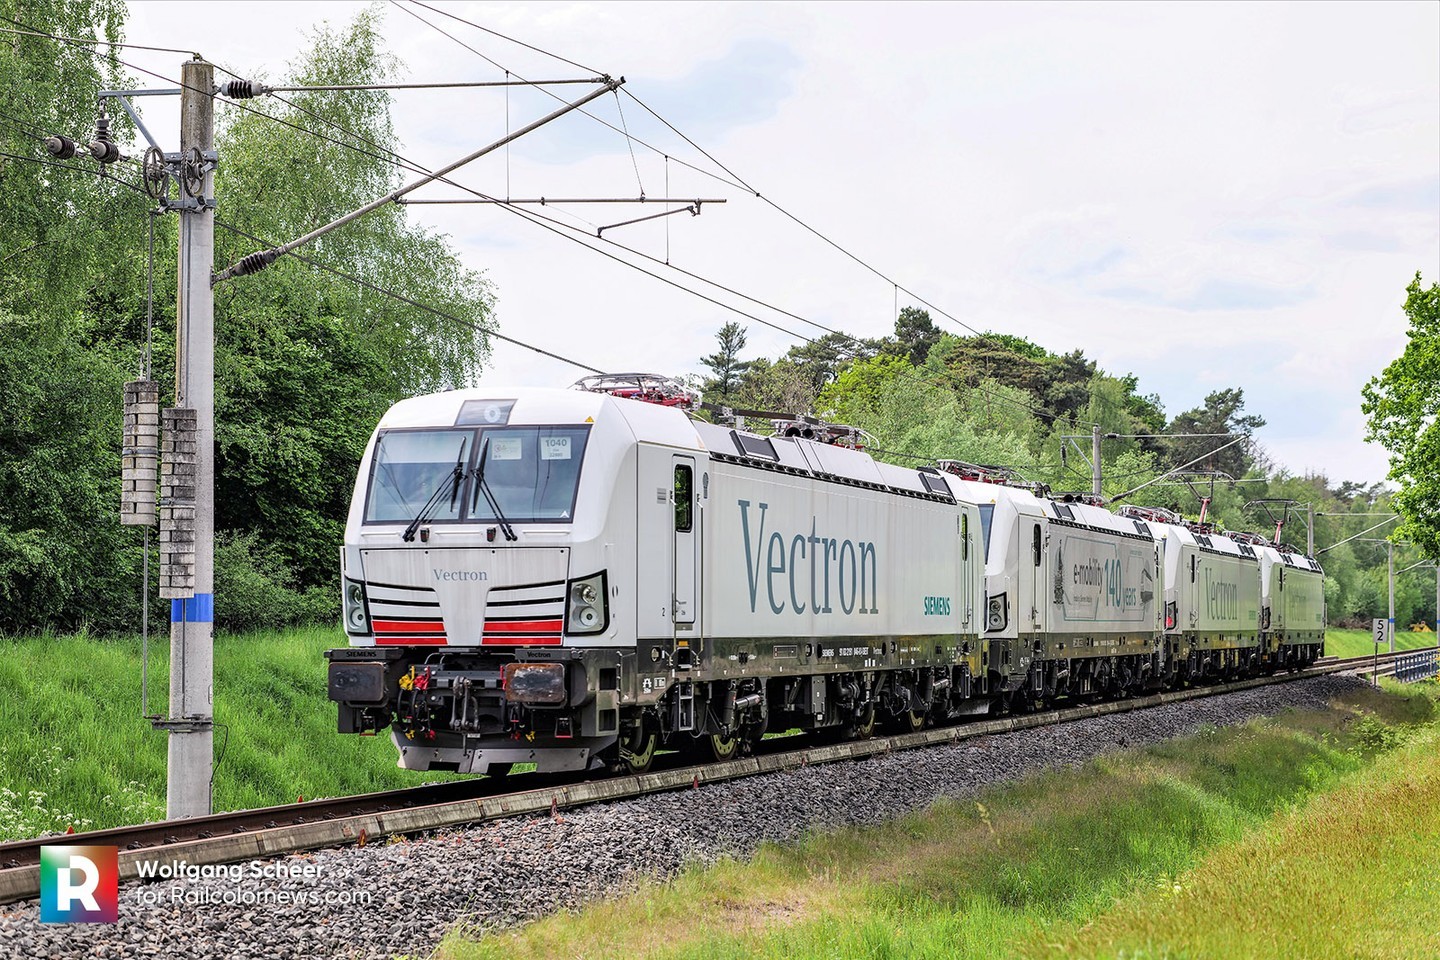 📷 by Wolfgang Scheer 🇩🇪 191 046: a new testbed Vectron for Italy ⬆️ You don't see this article on RailcolorNews.com? Our subscribers do! 
www.railcolornews.com/expert 
.
.
.
.
#siemens #vectron #siemensvectron #191046 #testbed #electriclocomotive #railways #railways_of_europe #railcolornews  #locomotive #dcvectron #vectronfan #vectron193 #vectronarmy #siemensvectron193 #siemens_mobility #Wegberg-Wildenrath #rollingstock #locomotive #electriclocomotive #eisenbahnfieber #zug #züge